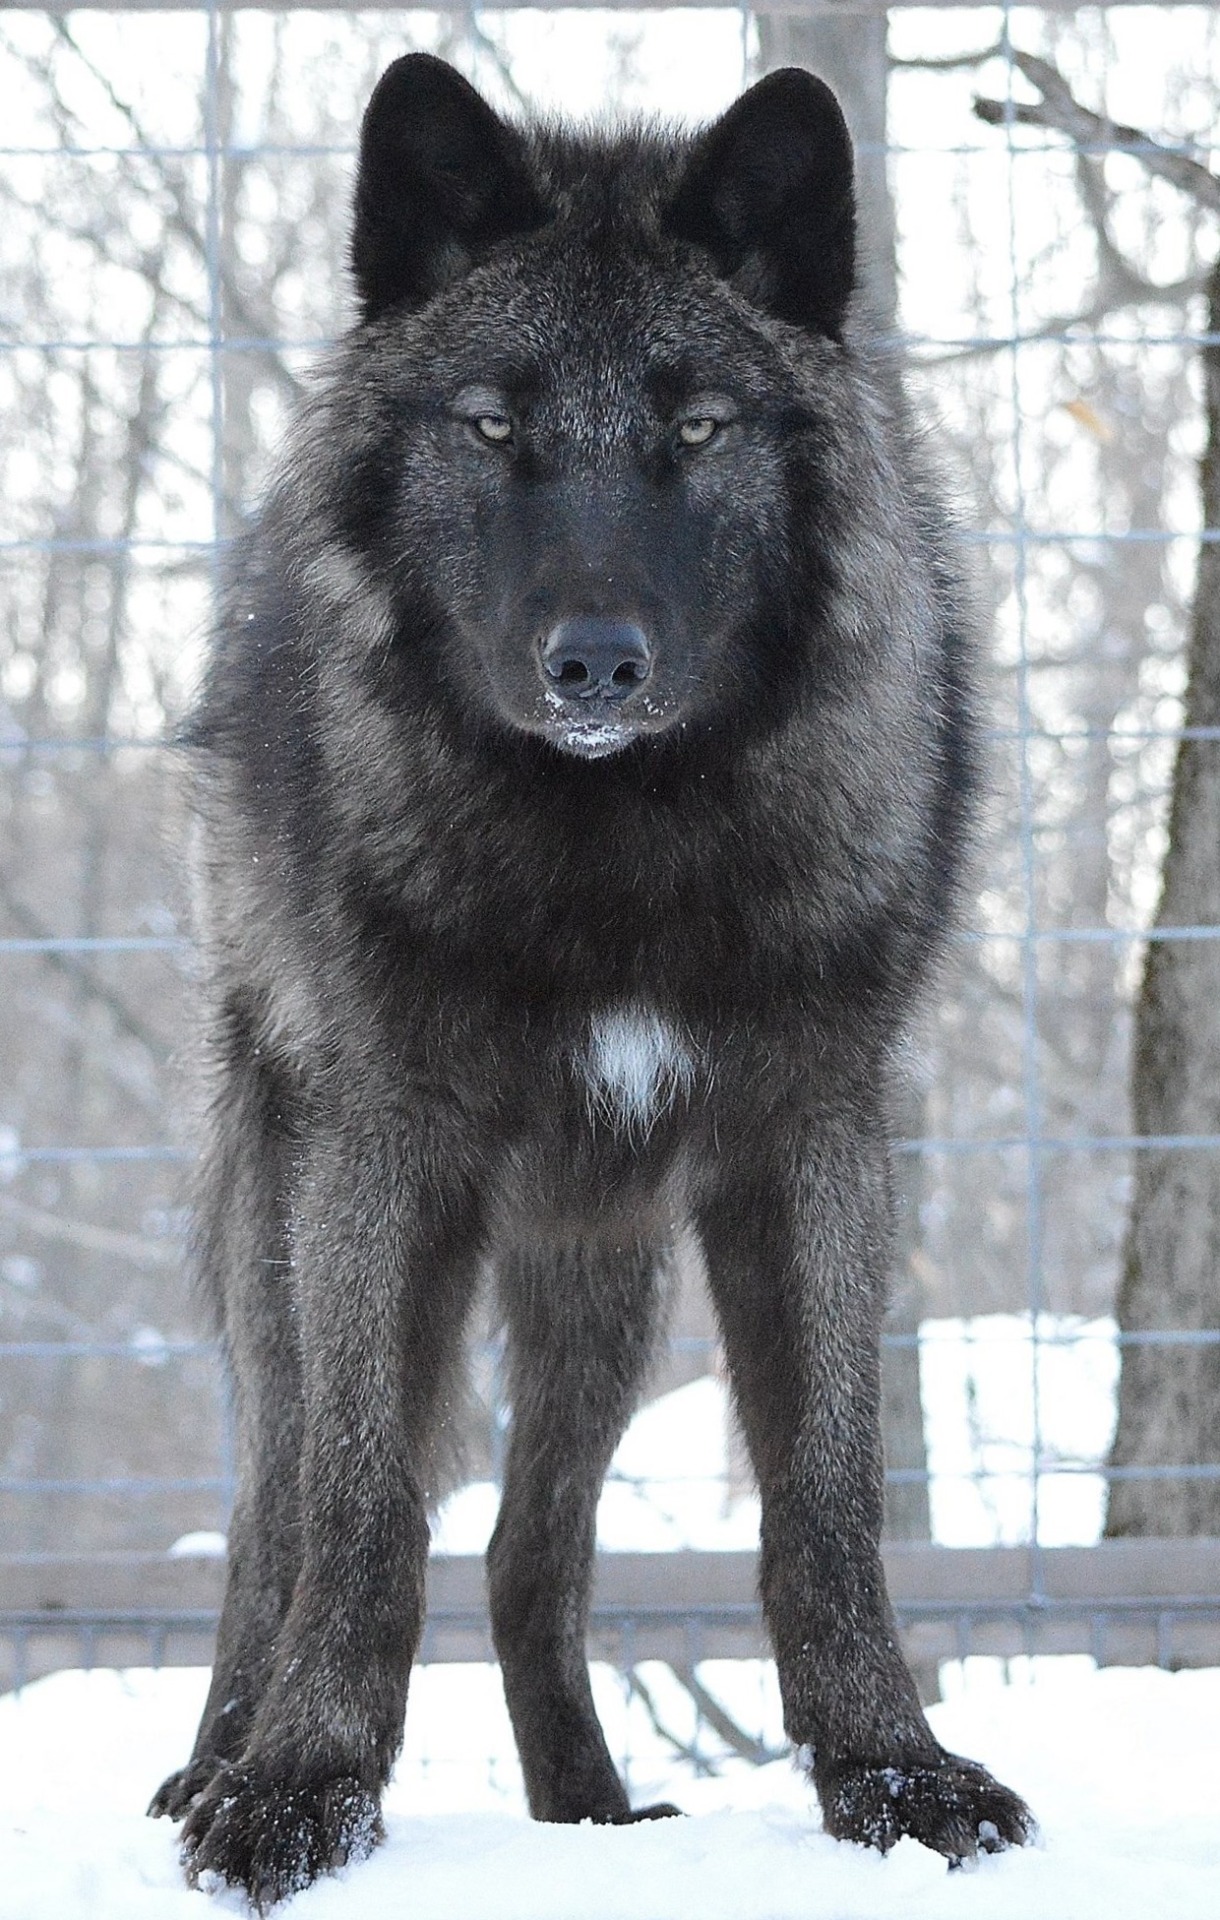 yourdogisnotawolf:
“ “Athens, a very high content wolfdog, one of the loves of my life and my heart and soul. Age 8 months in this photo.
”
Absolutely gorgeous animal! I can’t believe he’s only 8 months here, he looks so grown and these colors will...